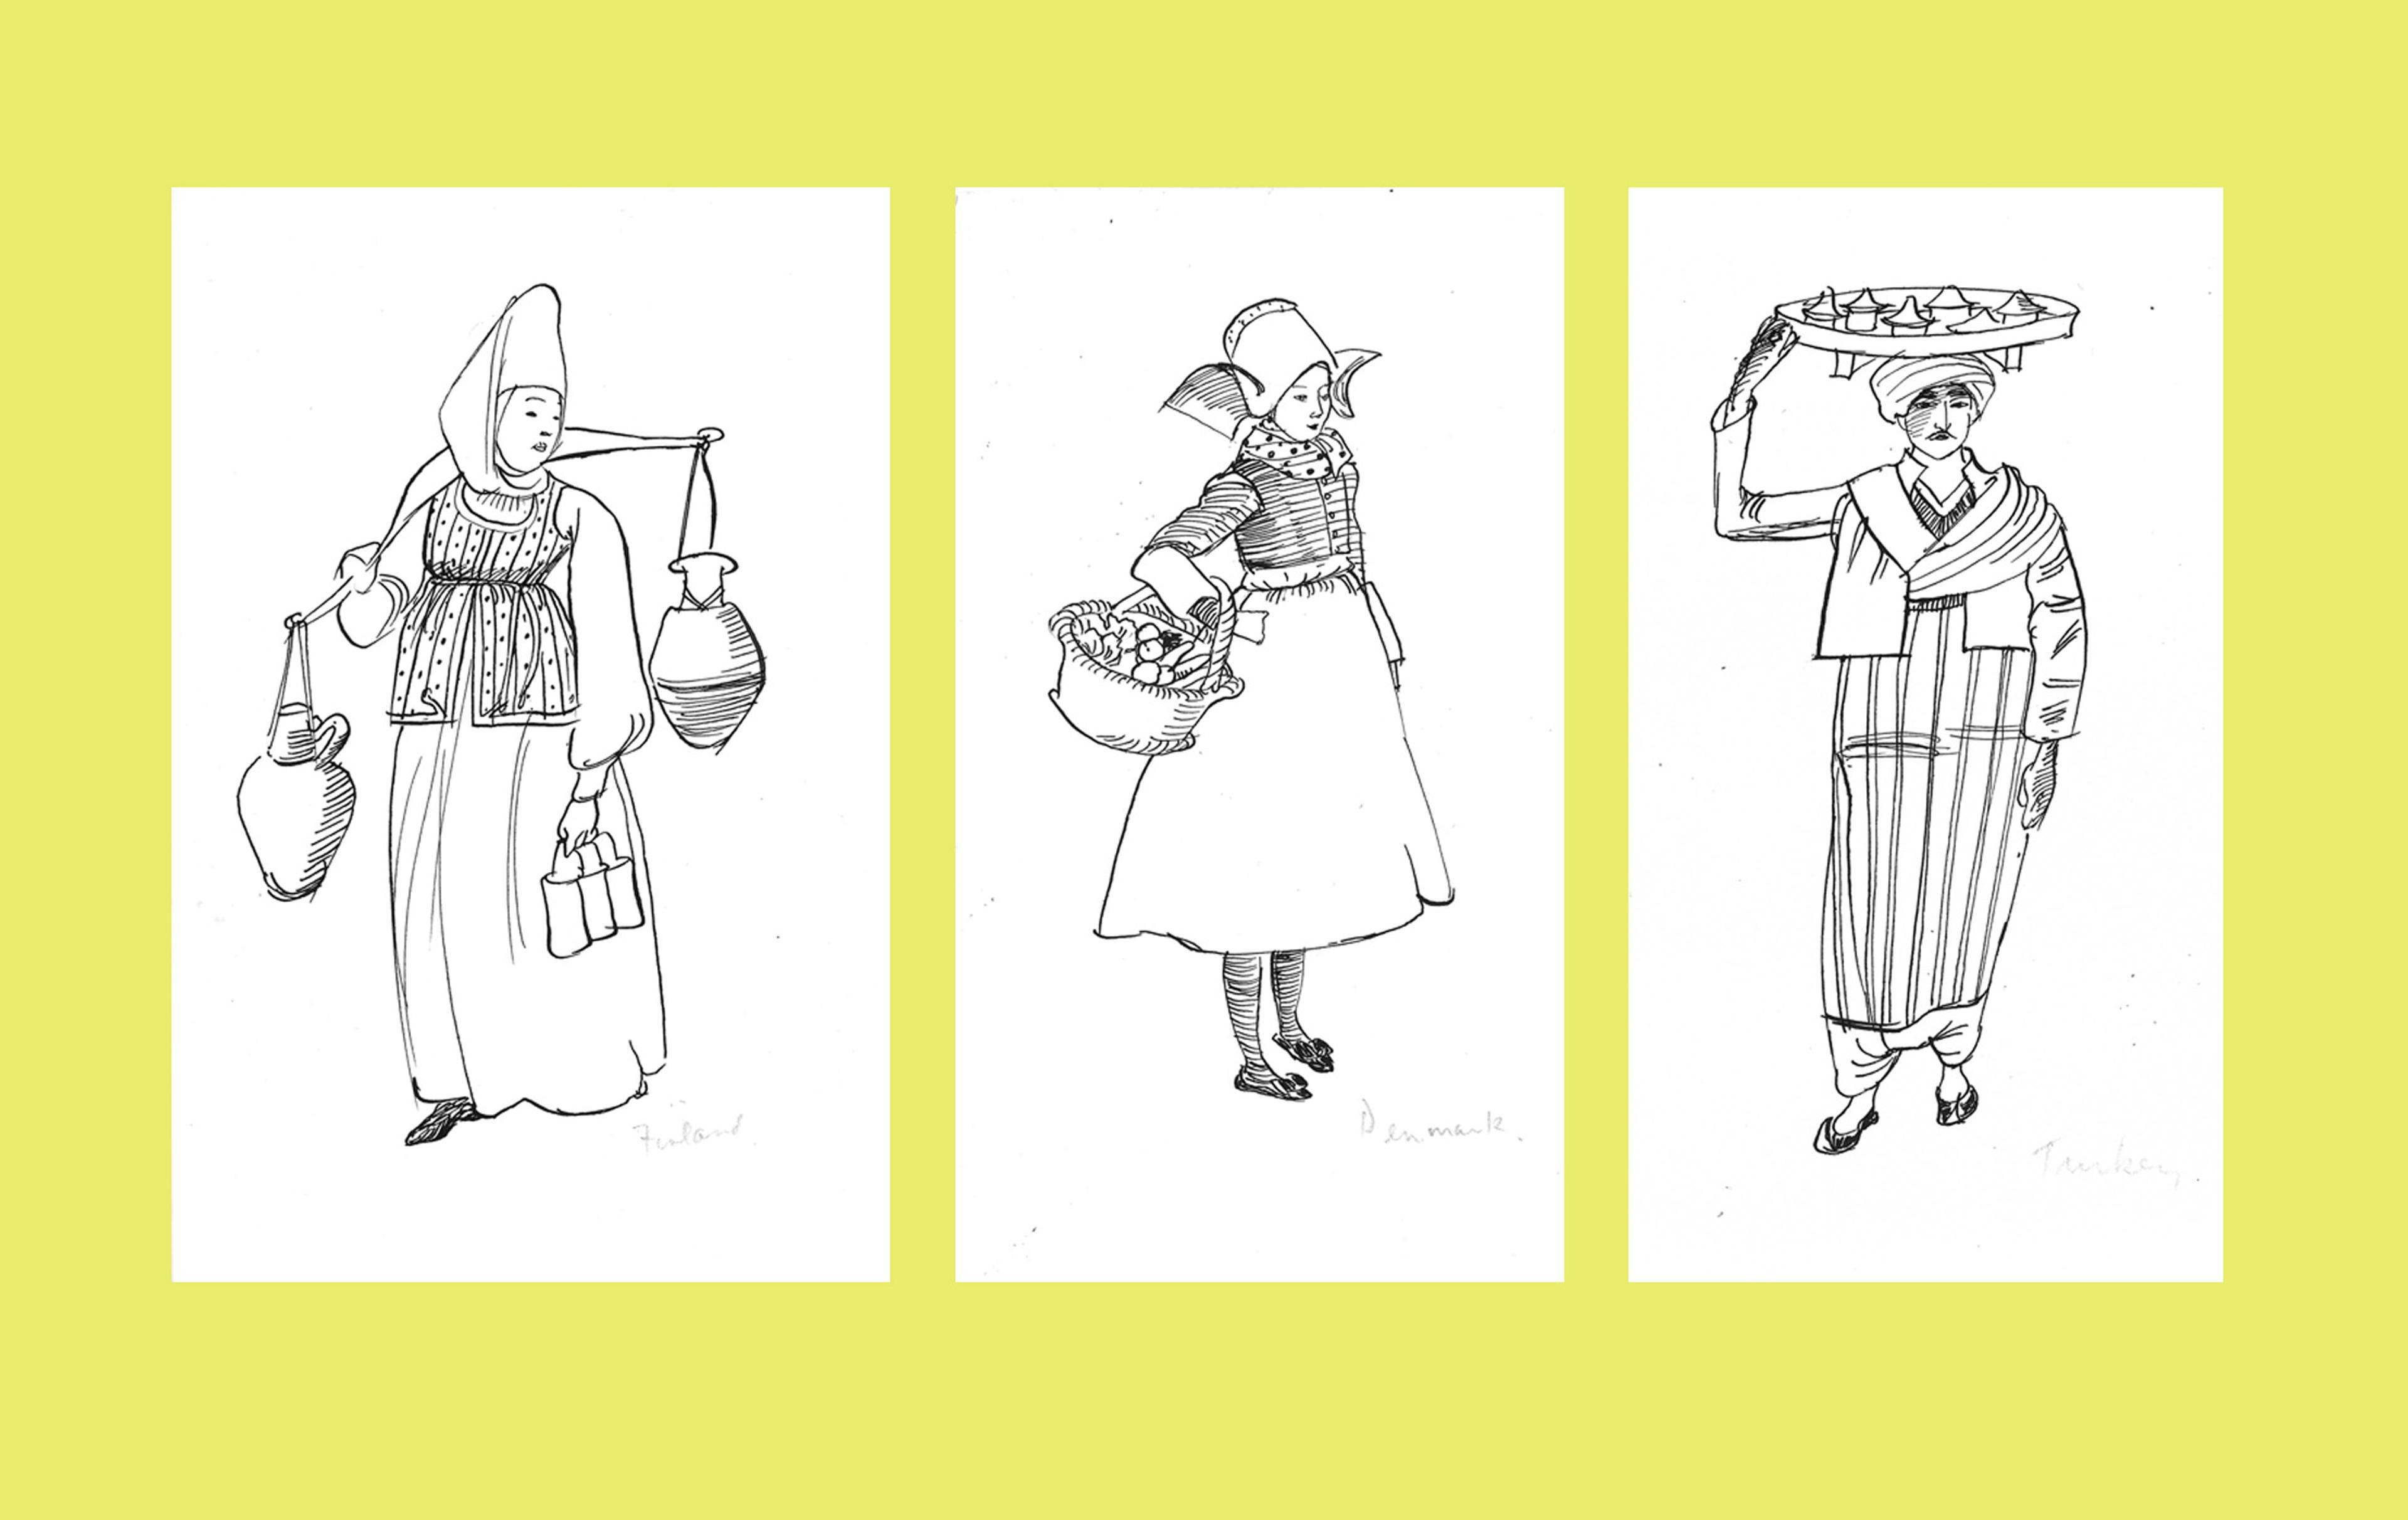 Three black ink drawings on white paper of people in national dress. All three are wearing hats and long garments and carrying produce.